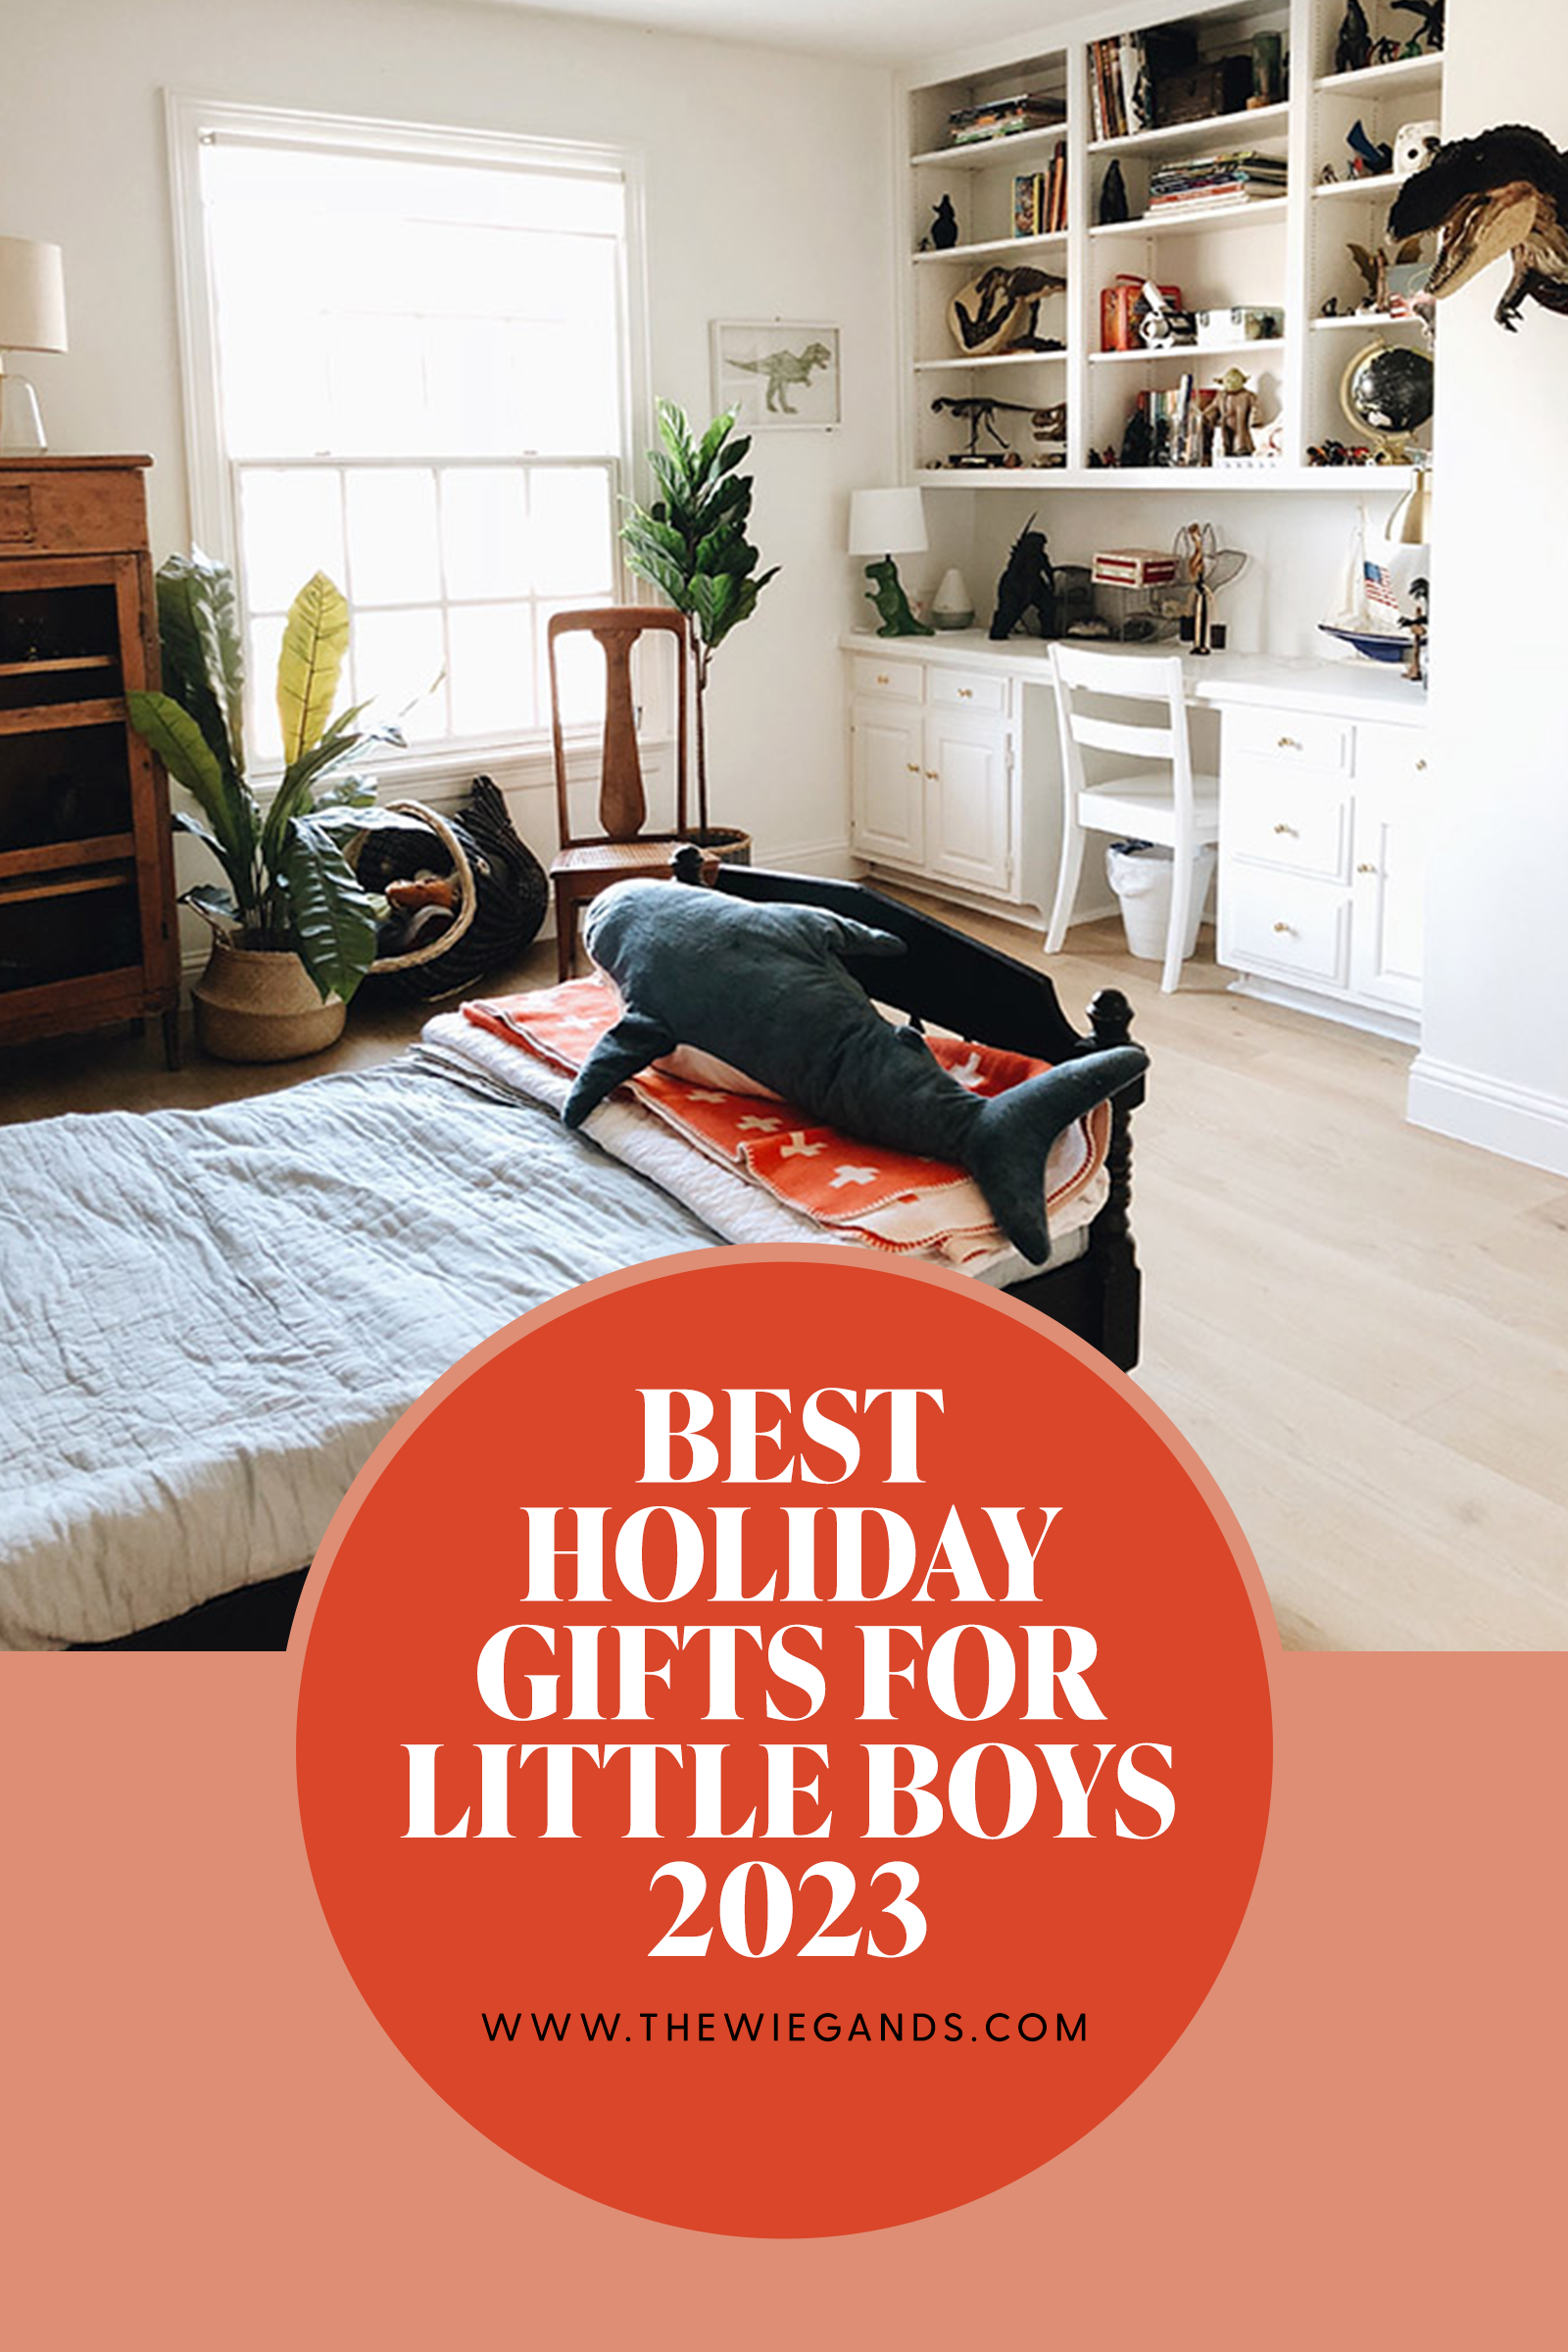 22 luxury gifts kids will love in 2023